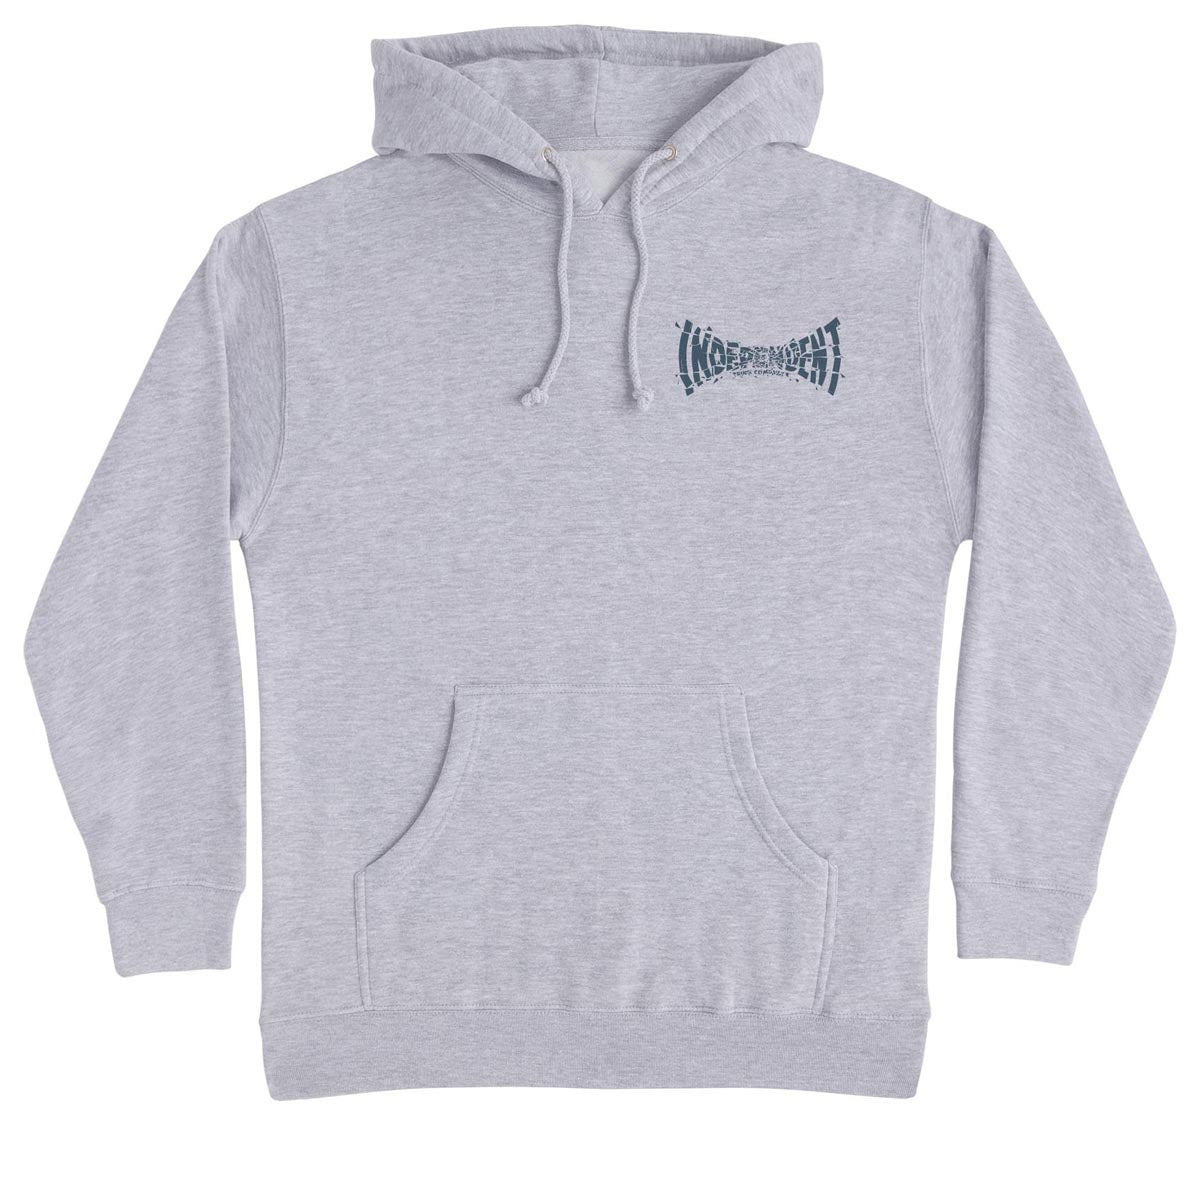 Independent Shatter Span Hoodie - Heather Grey image 1